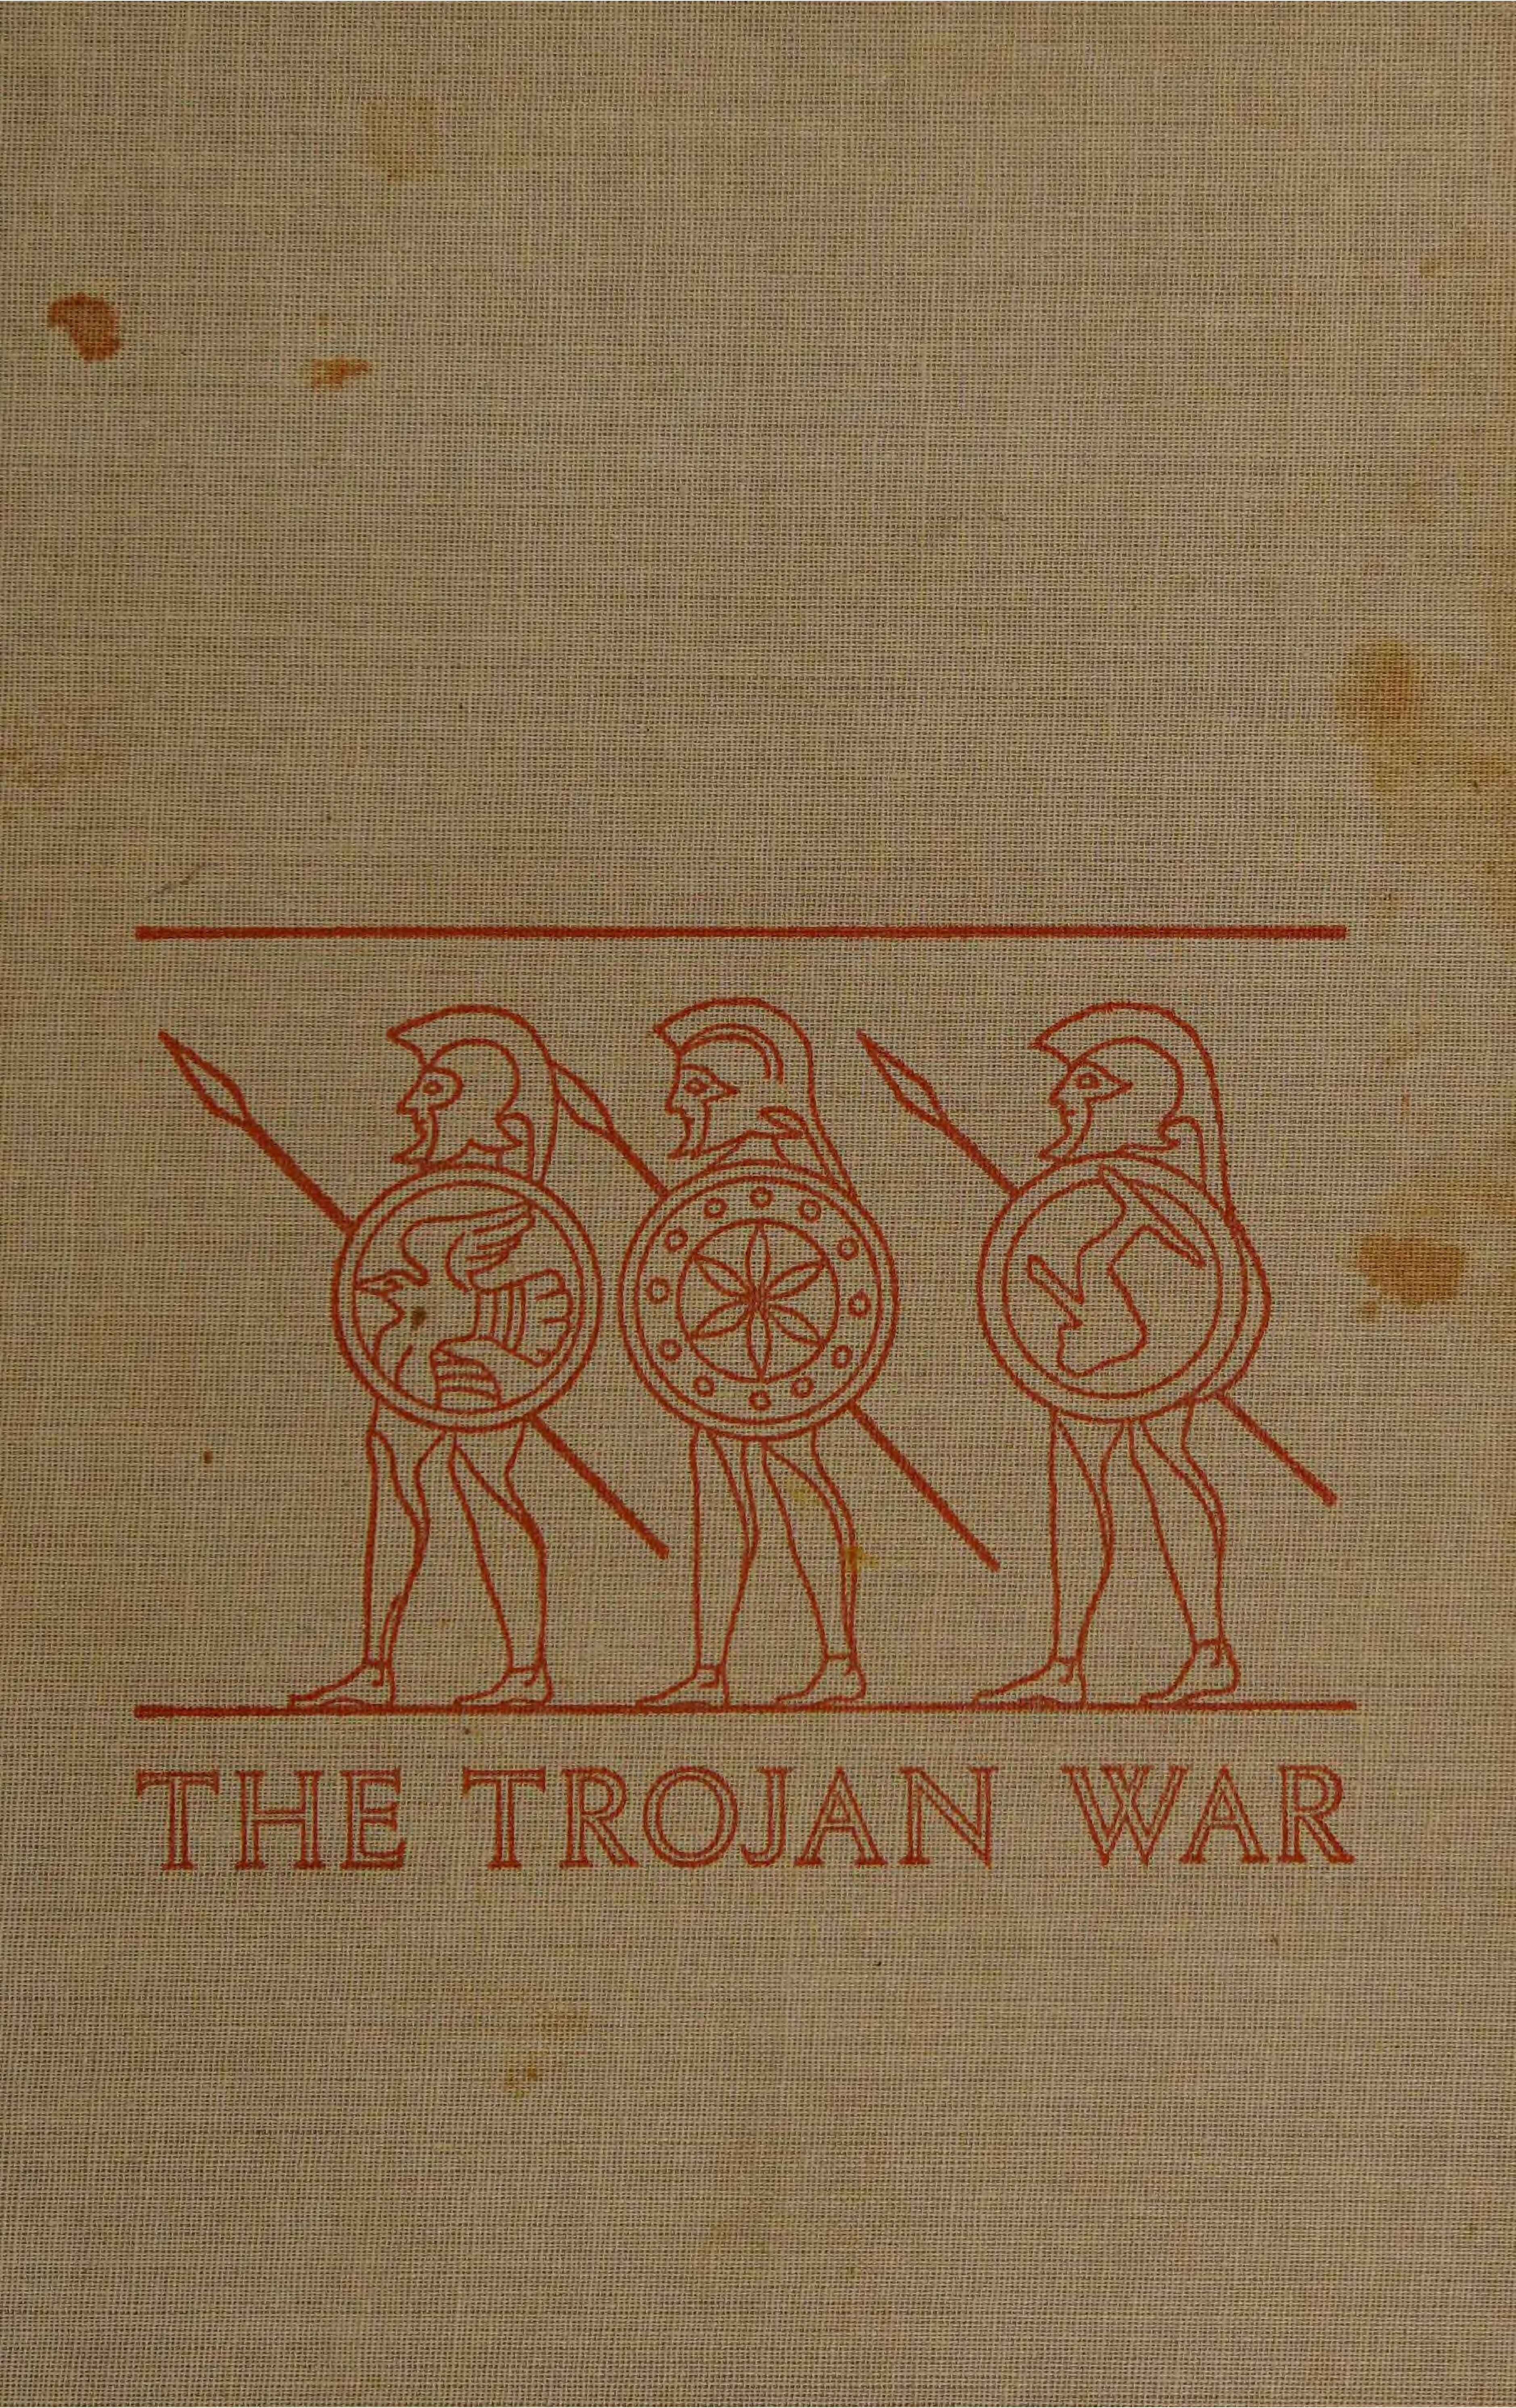 The Trojan War: The Chronicles of Dictys of Crete and Dares the Phrygian